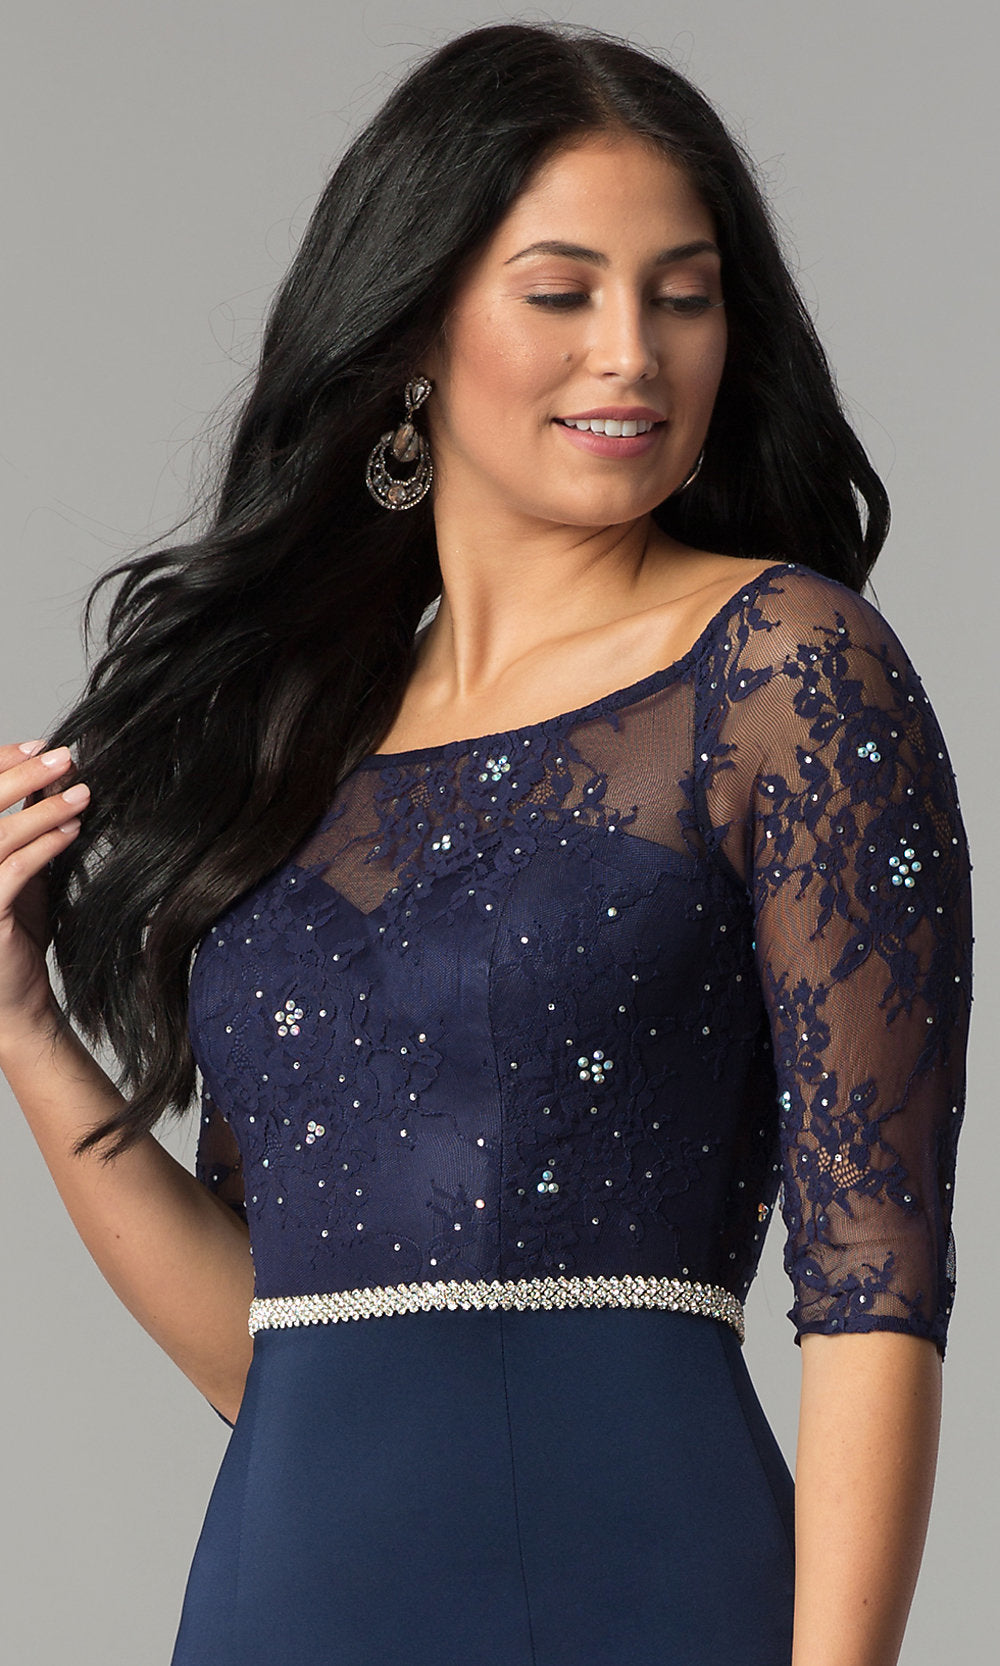  Formal Dress with Sheer Lace Three-Quarter Sleeves